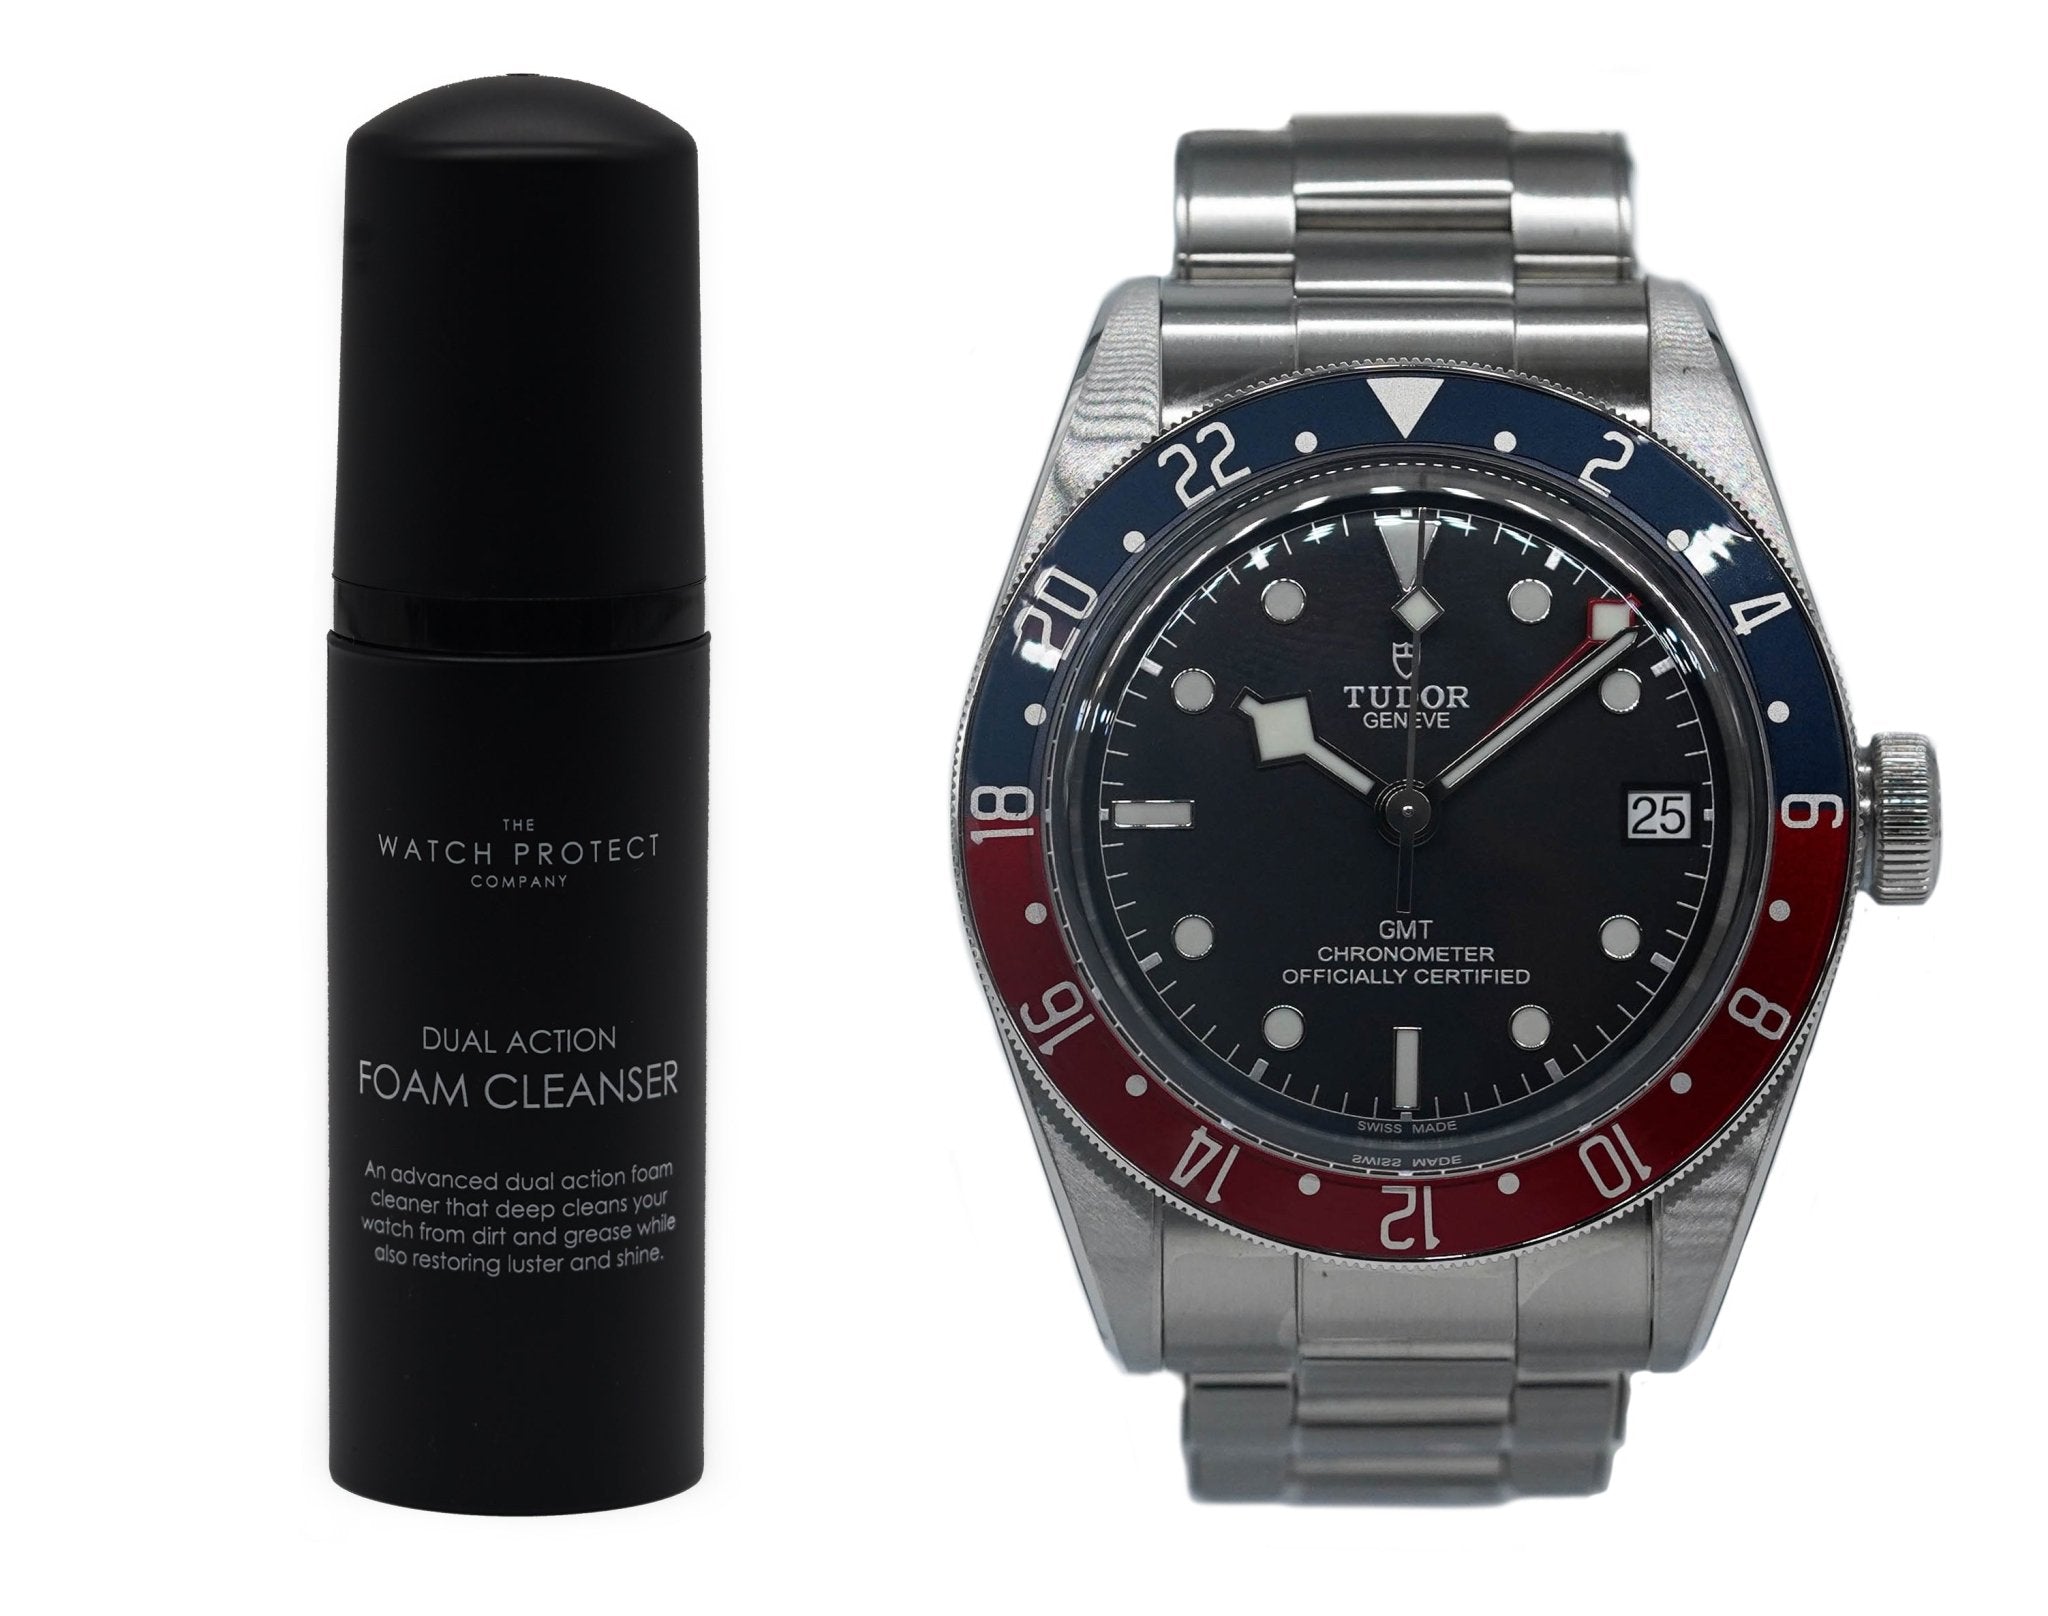 DUAL ACTION FOAM CLEANER & TUDOR BLACK BAY GMT - TIER 3 - WATCH PROTECTION KIT BUNDLE - The Watch Protect Company